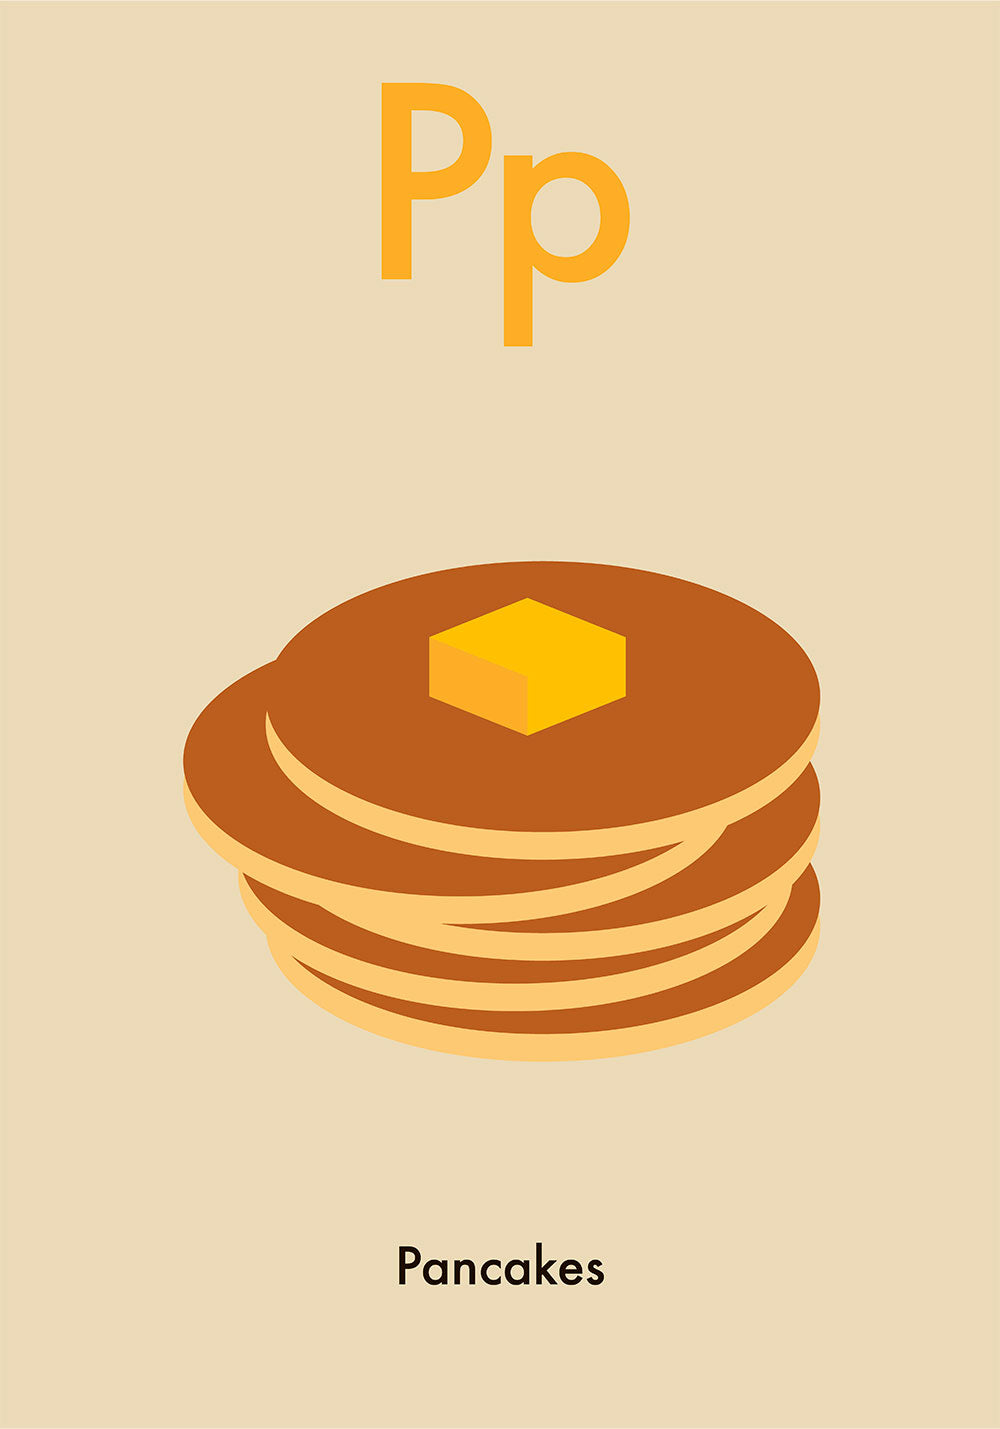 P for Pancakes - Children's Alphabet Poster in English